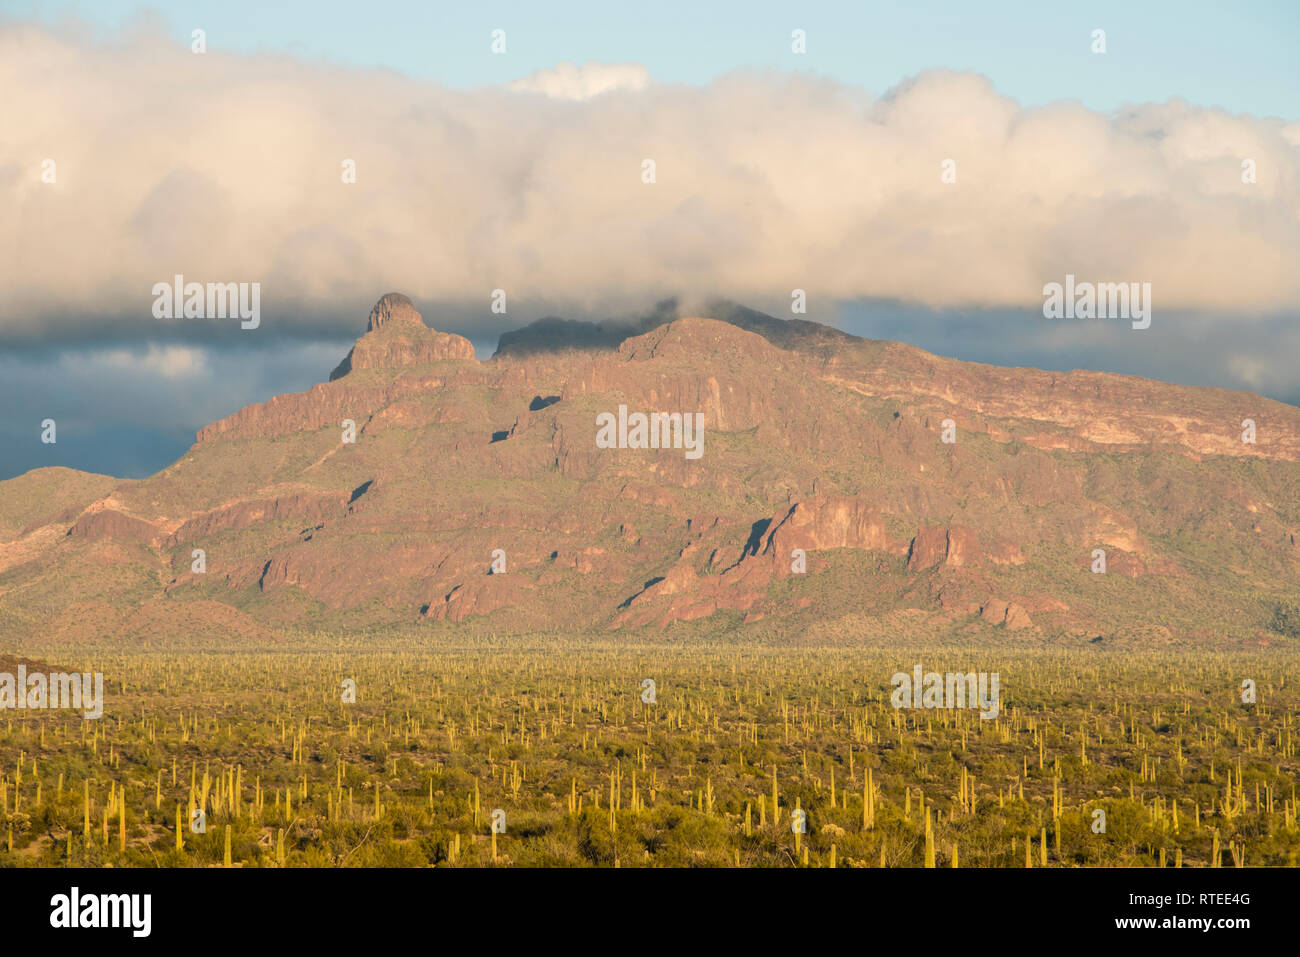 Clouds over the Ajo Range in Organ Pipe Cactus National Monument, south central Arizona, USA Stock Photo